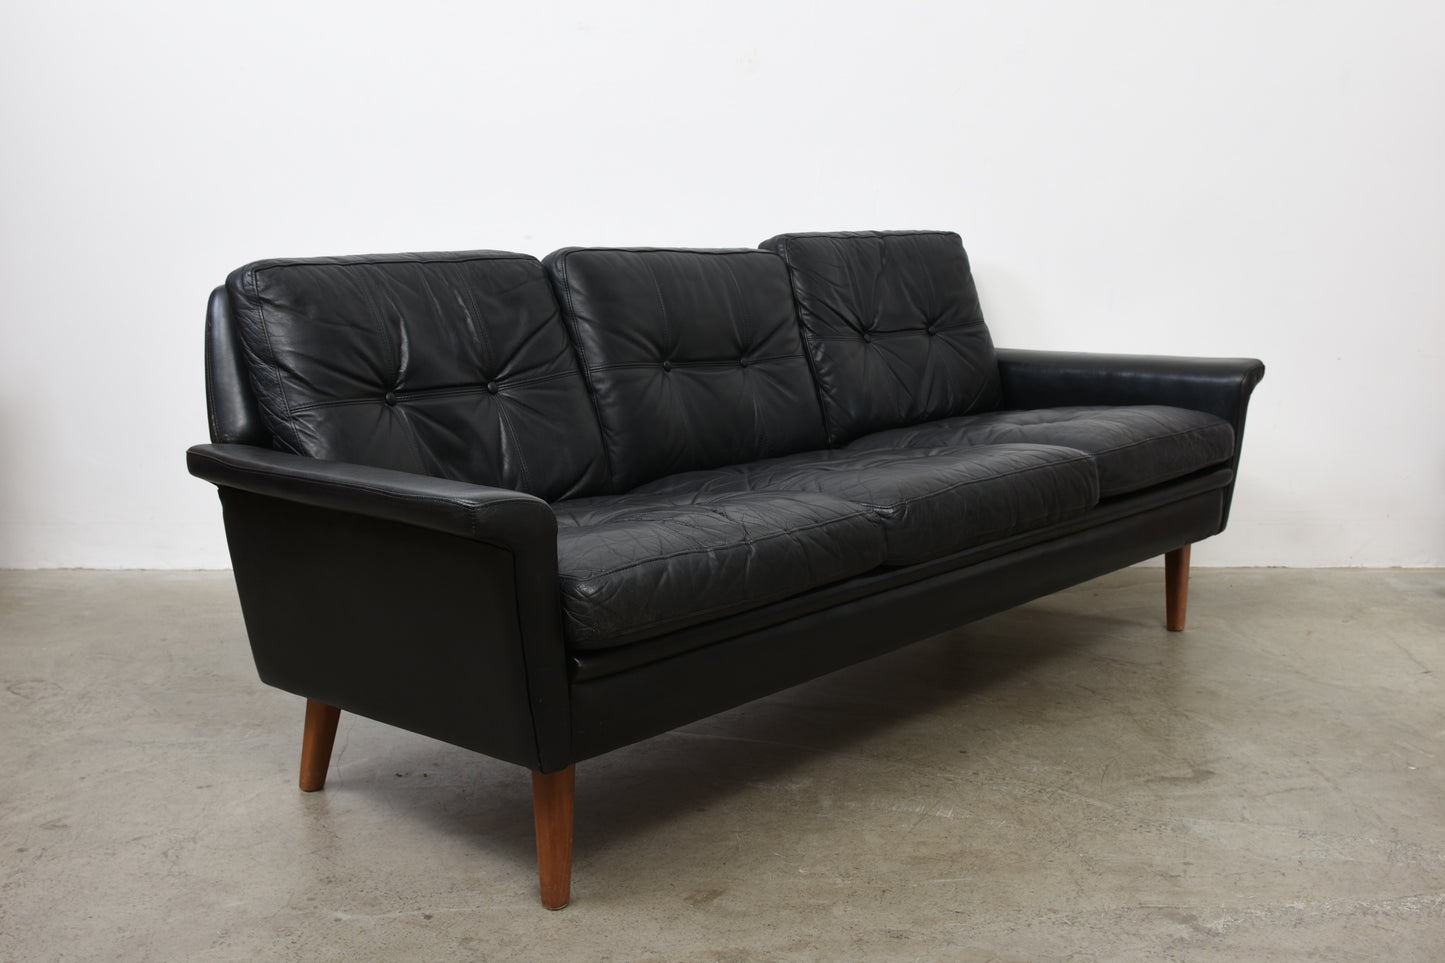 1960s leather three seater by Nili